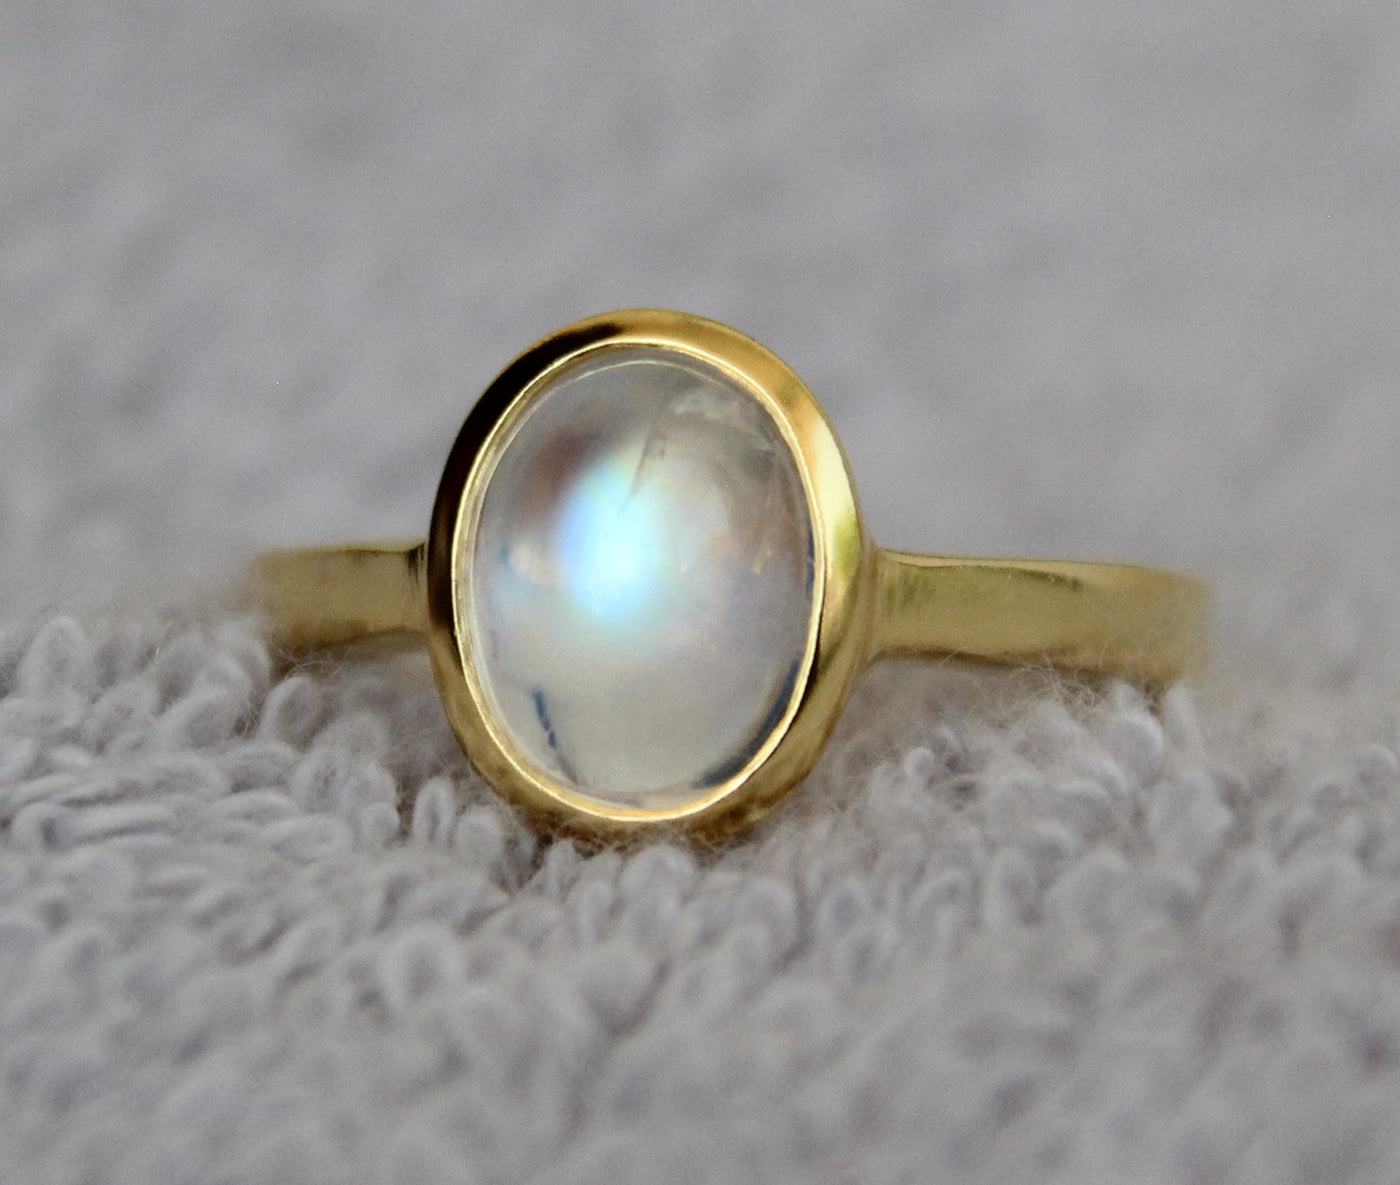 Rainbow Moonstone Ring, Sterling Silver Rings for Women, June Birthstone Ring, Promise Anniversary Ring Rose Gold Plated Ring,Boho,Statement